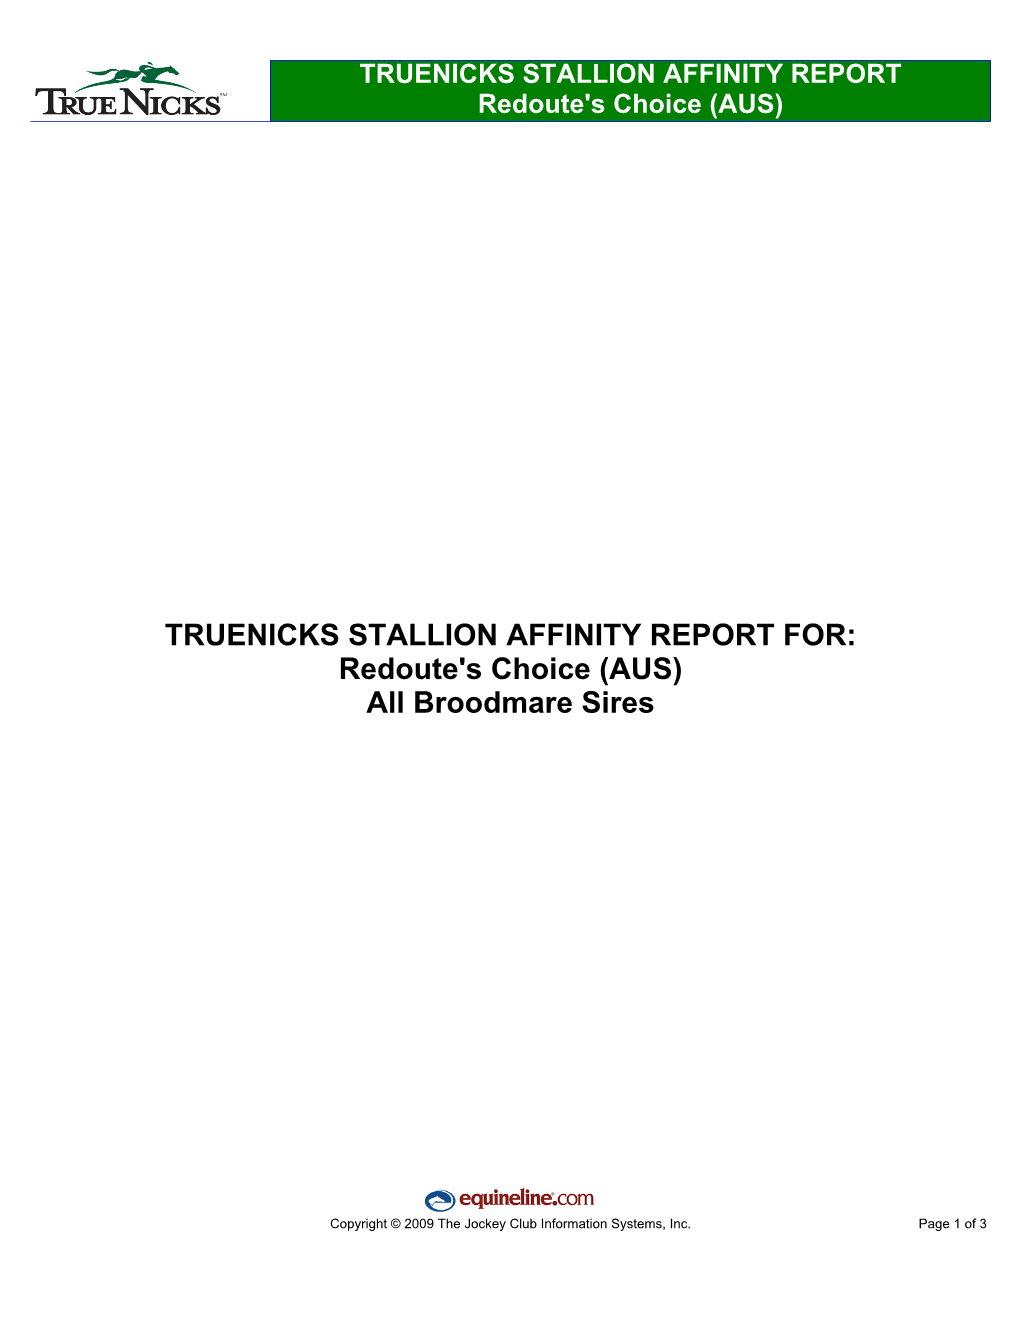 TRUENICKS STALLION AFFINITY REPORT FOR: Redoute's Choice (AUS) All Broodmare Sires